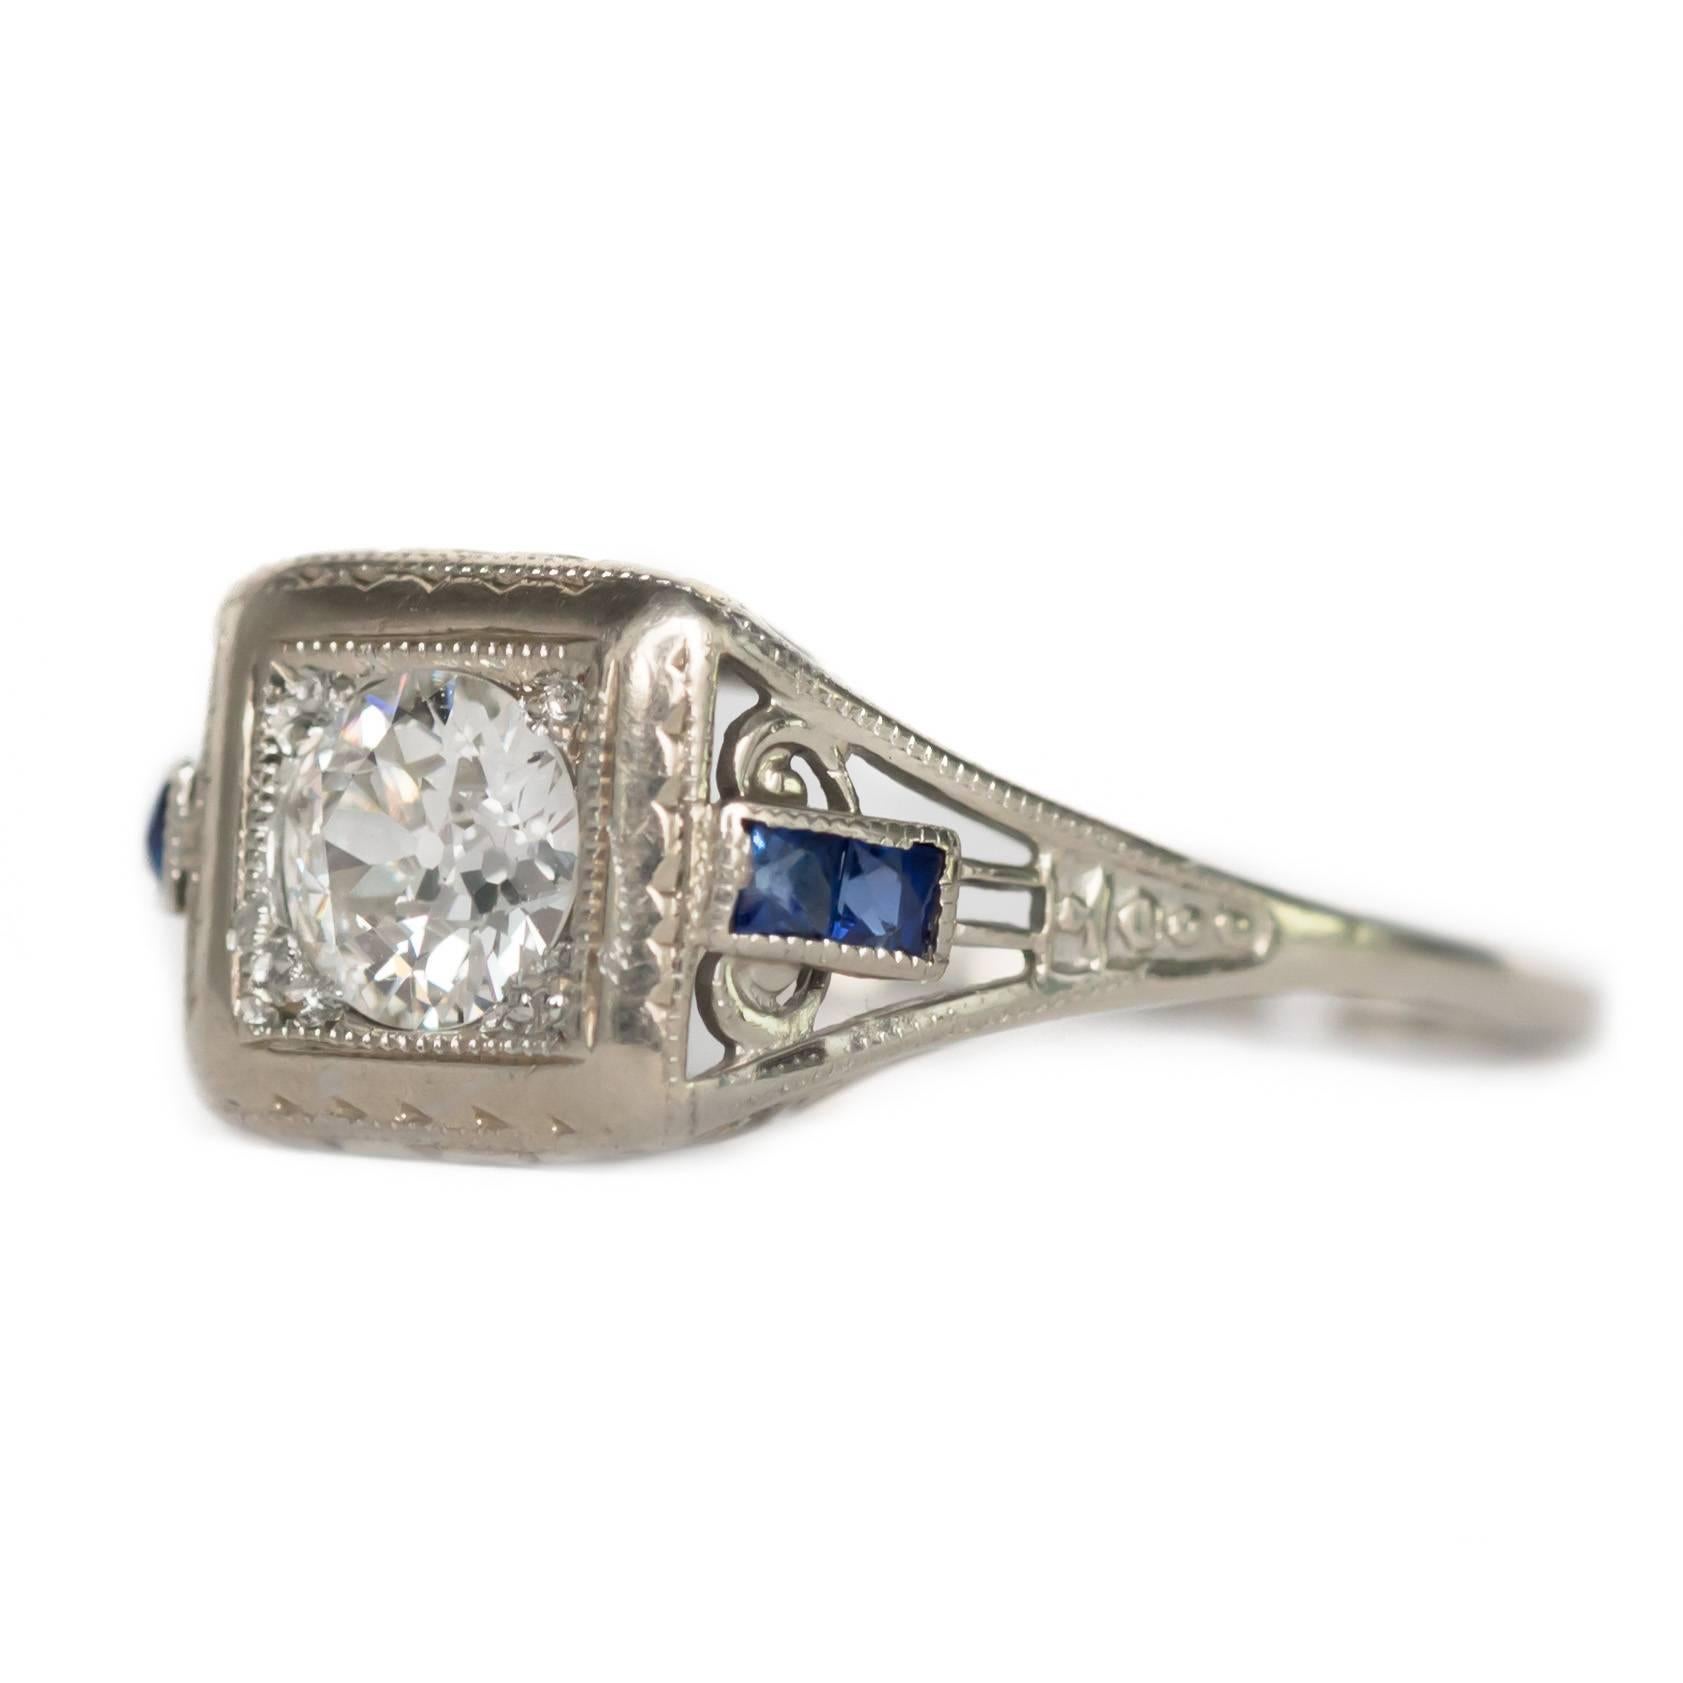 Item Details: 
Ring Size: Approximately 6
Metal Type: 14 Karat White Gold
Weight: 2.0 grams

Center Diamond Details
Shape: Old European
Carat Weight: .40 carat
Color: G
Clarity: SI1

Color Stone Details: 
Type: Sapphire
Shape: French Cut
Carat